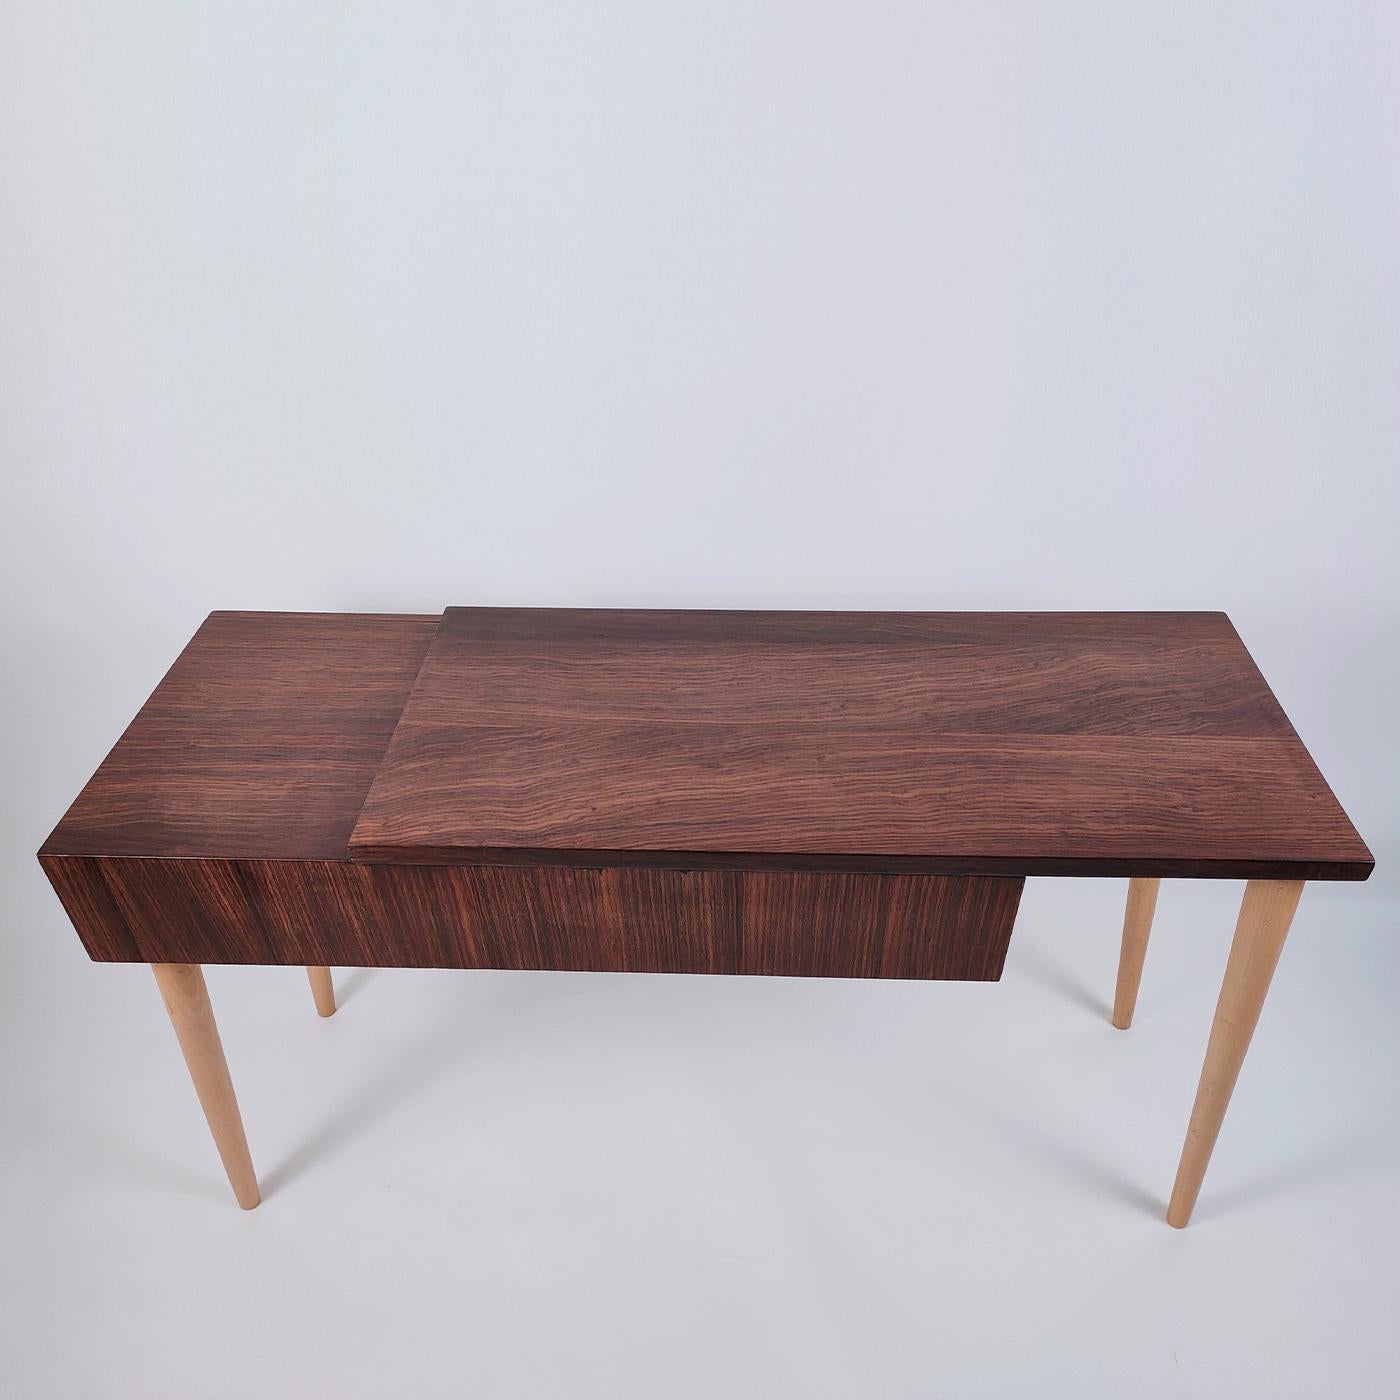 The Natasha Console offers a display-worthy design that takes a unique approach on a traditional wooden console. Handcrafted of prized rosewood, the distinctive top is split on two levels, one featuring a large handless drawer with solid beech